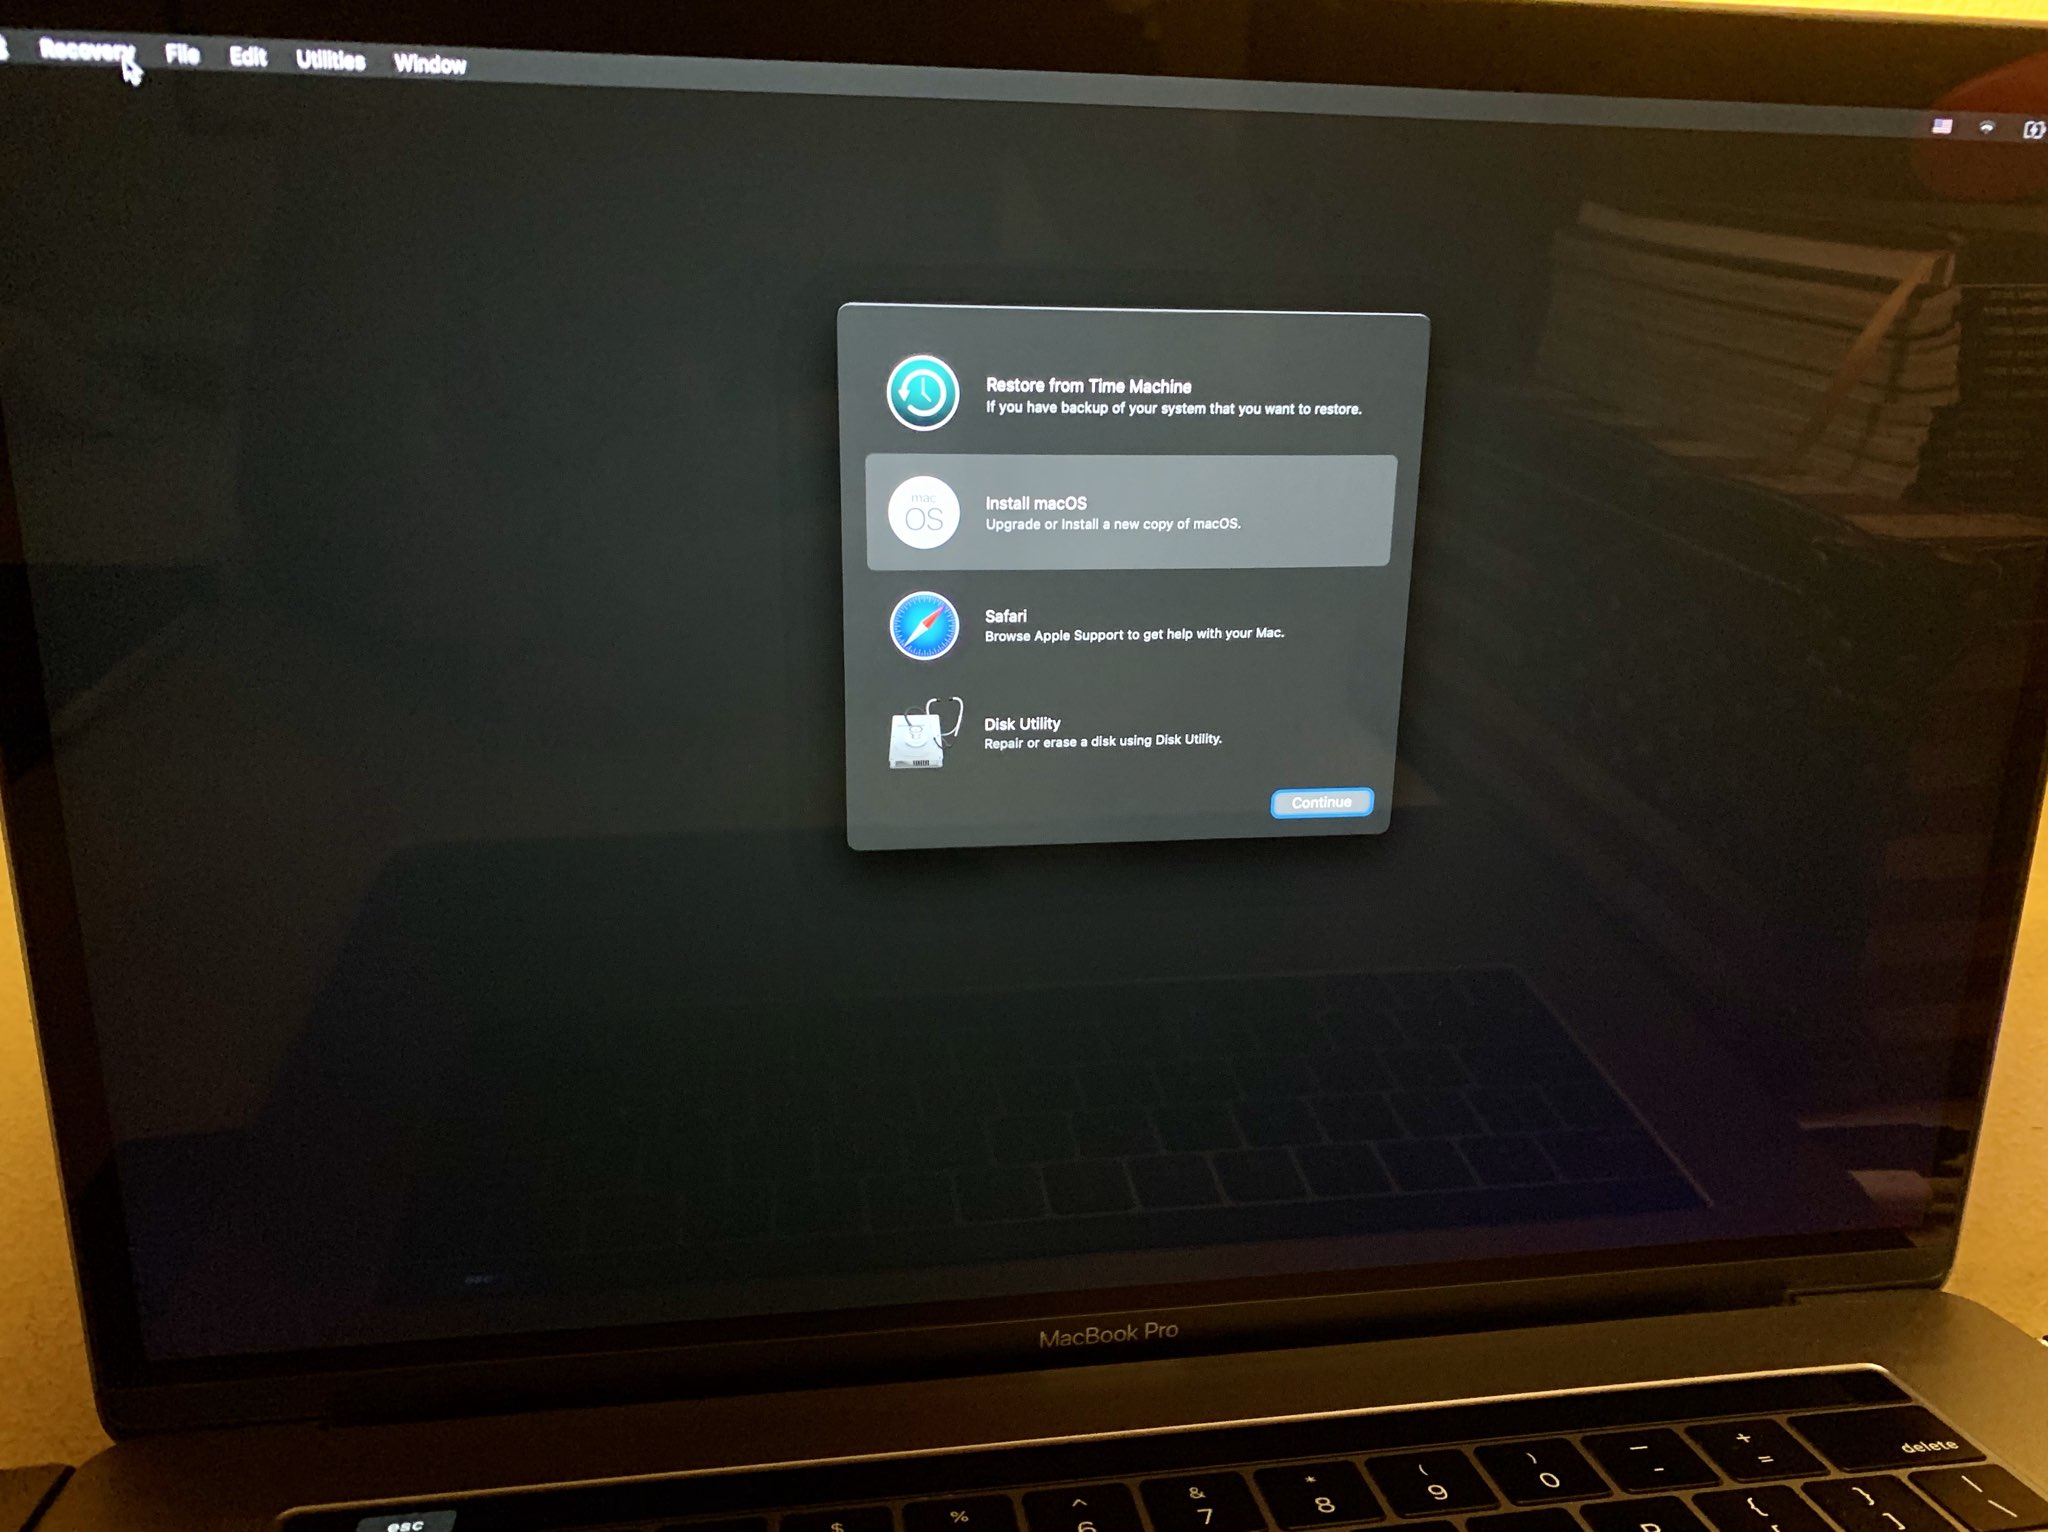 macos boot in recovery mode